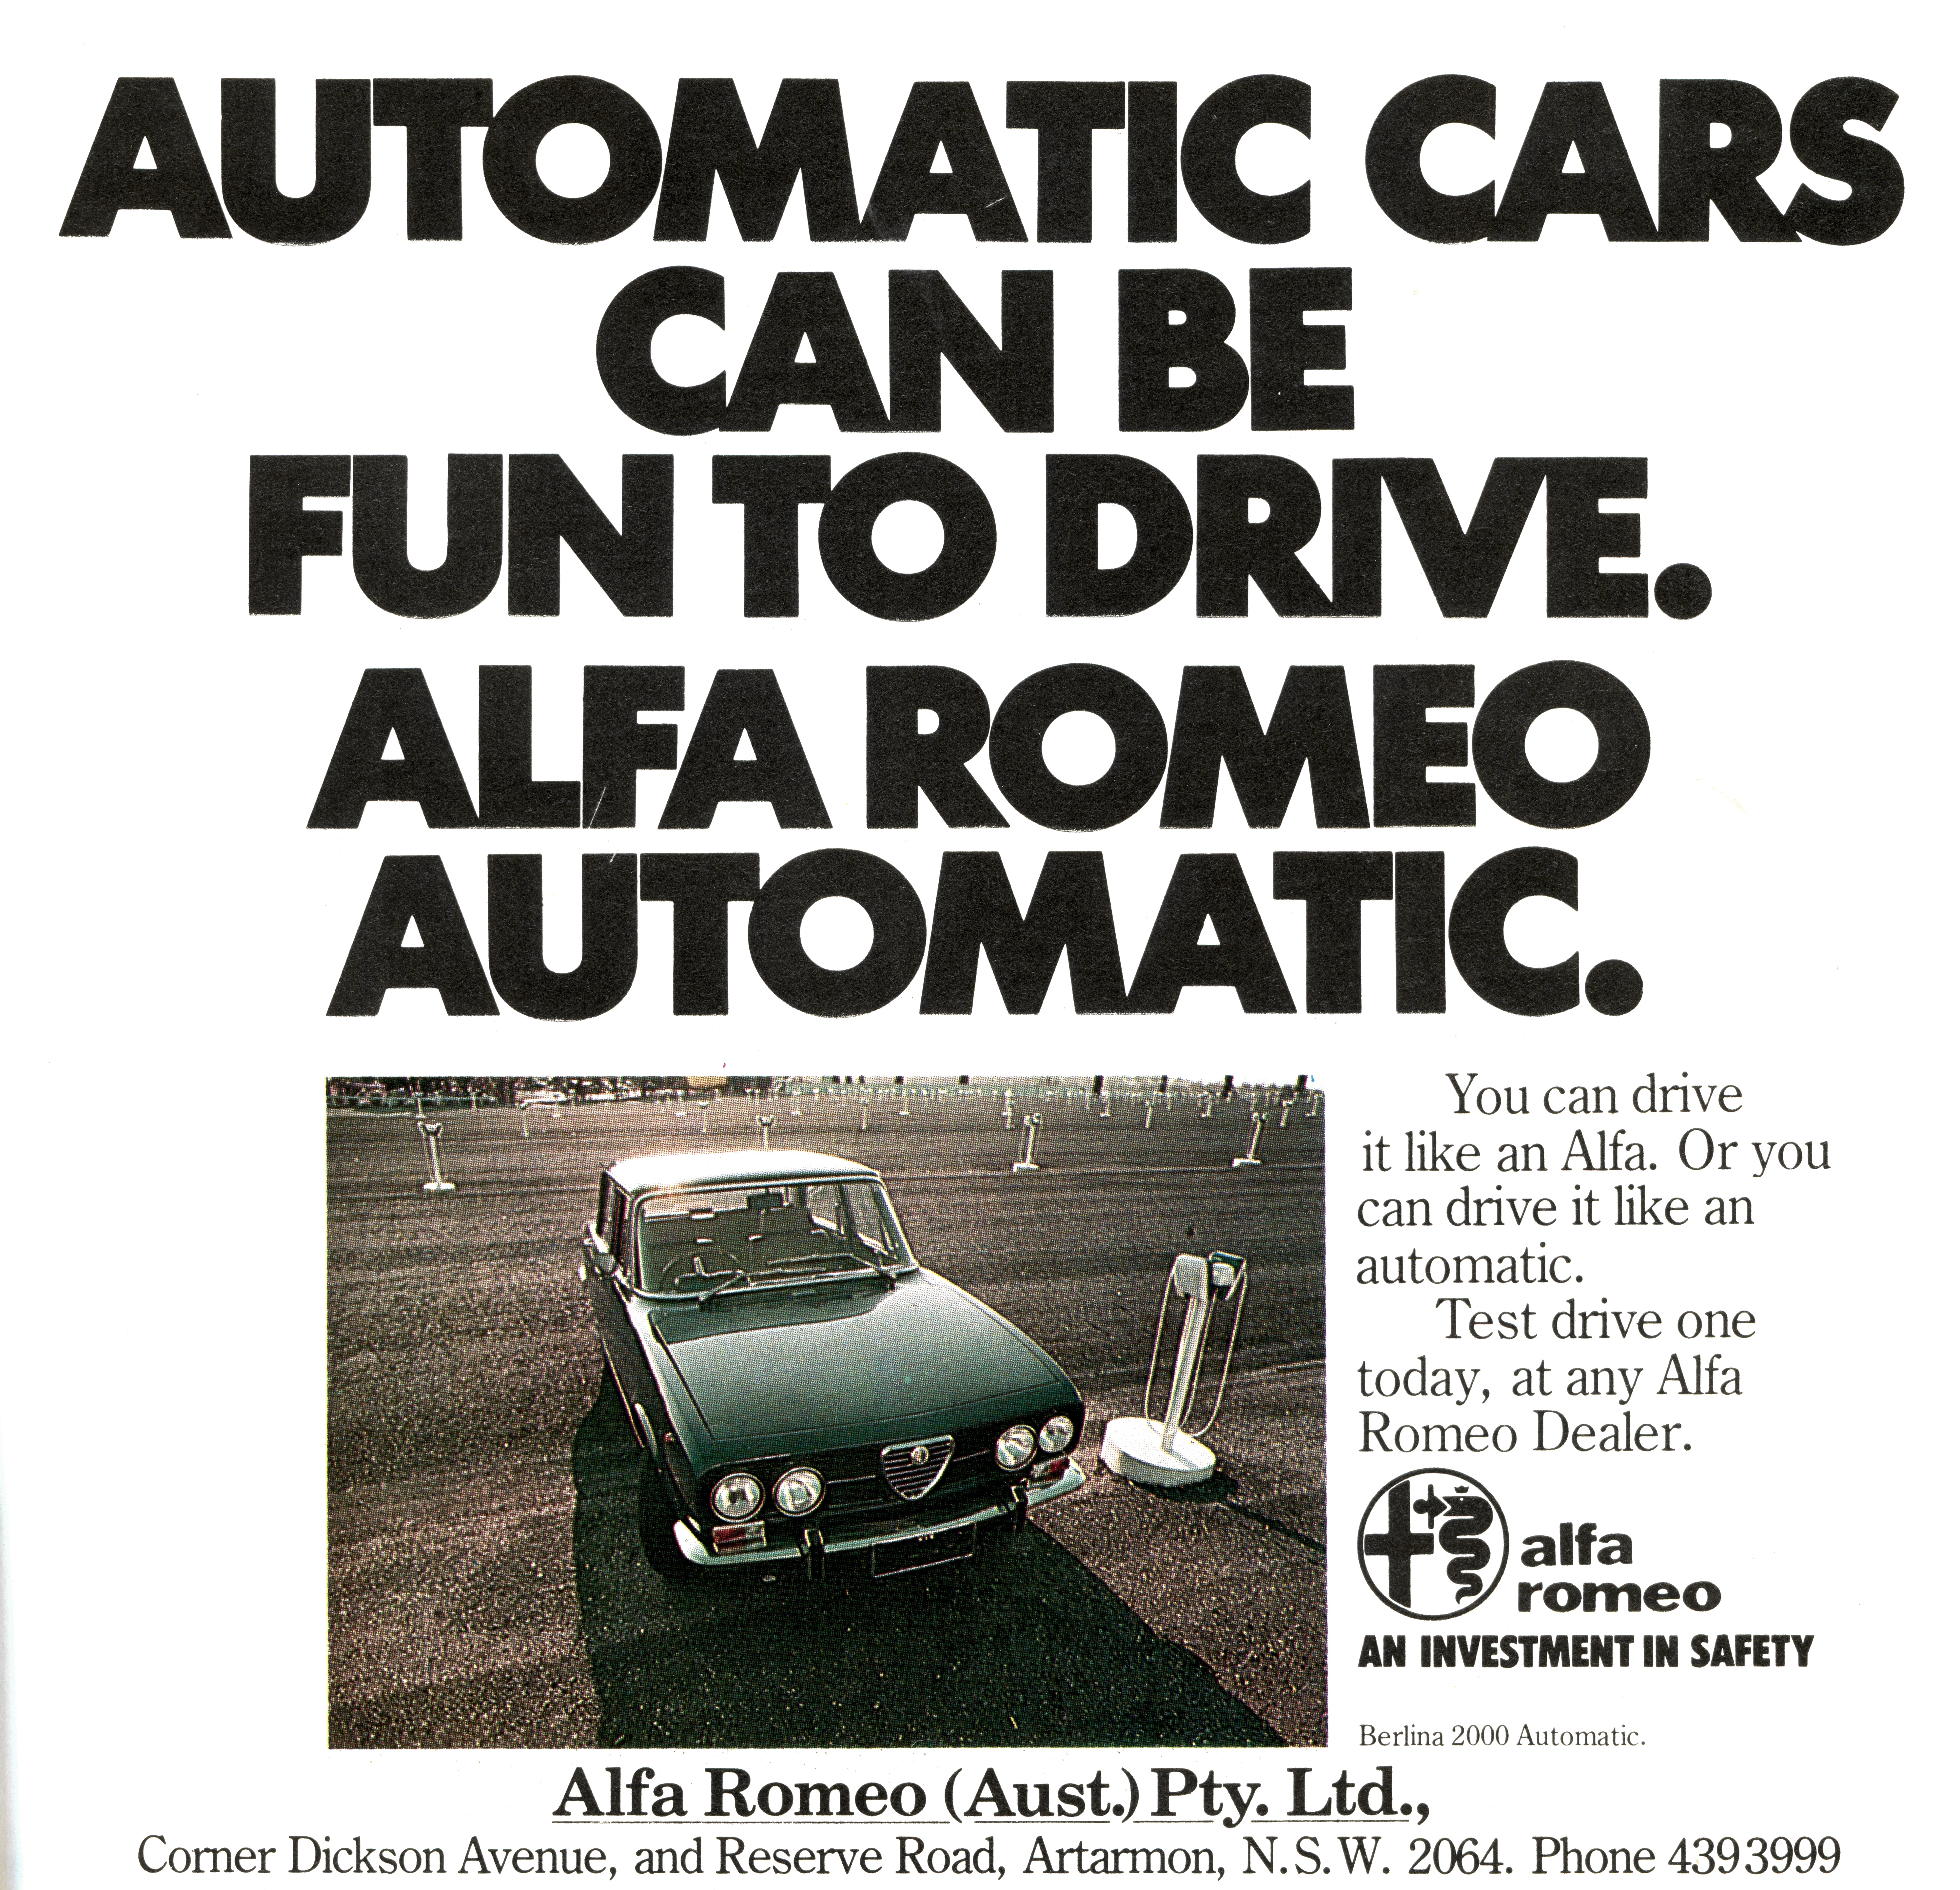 1975 Alfa Romeo - An Investment In Safety